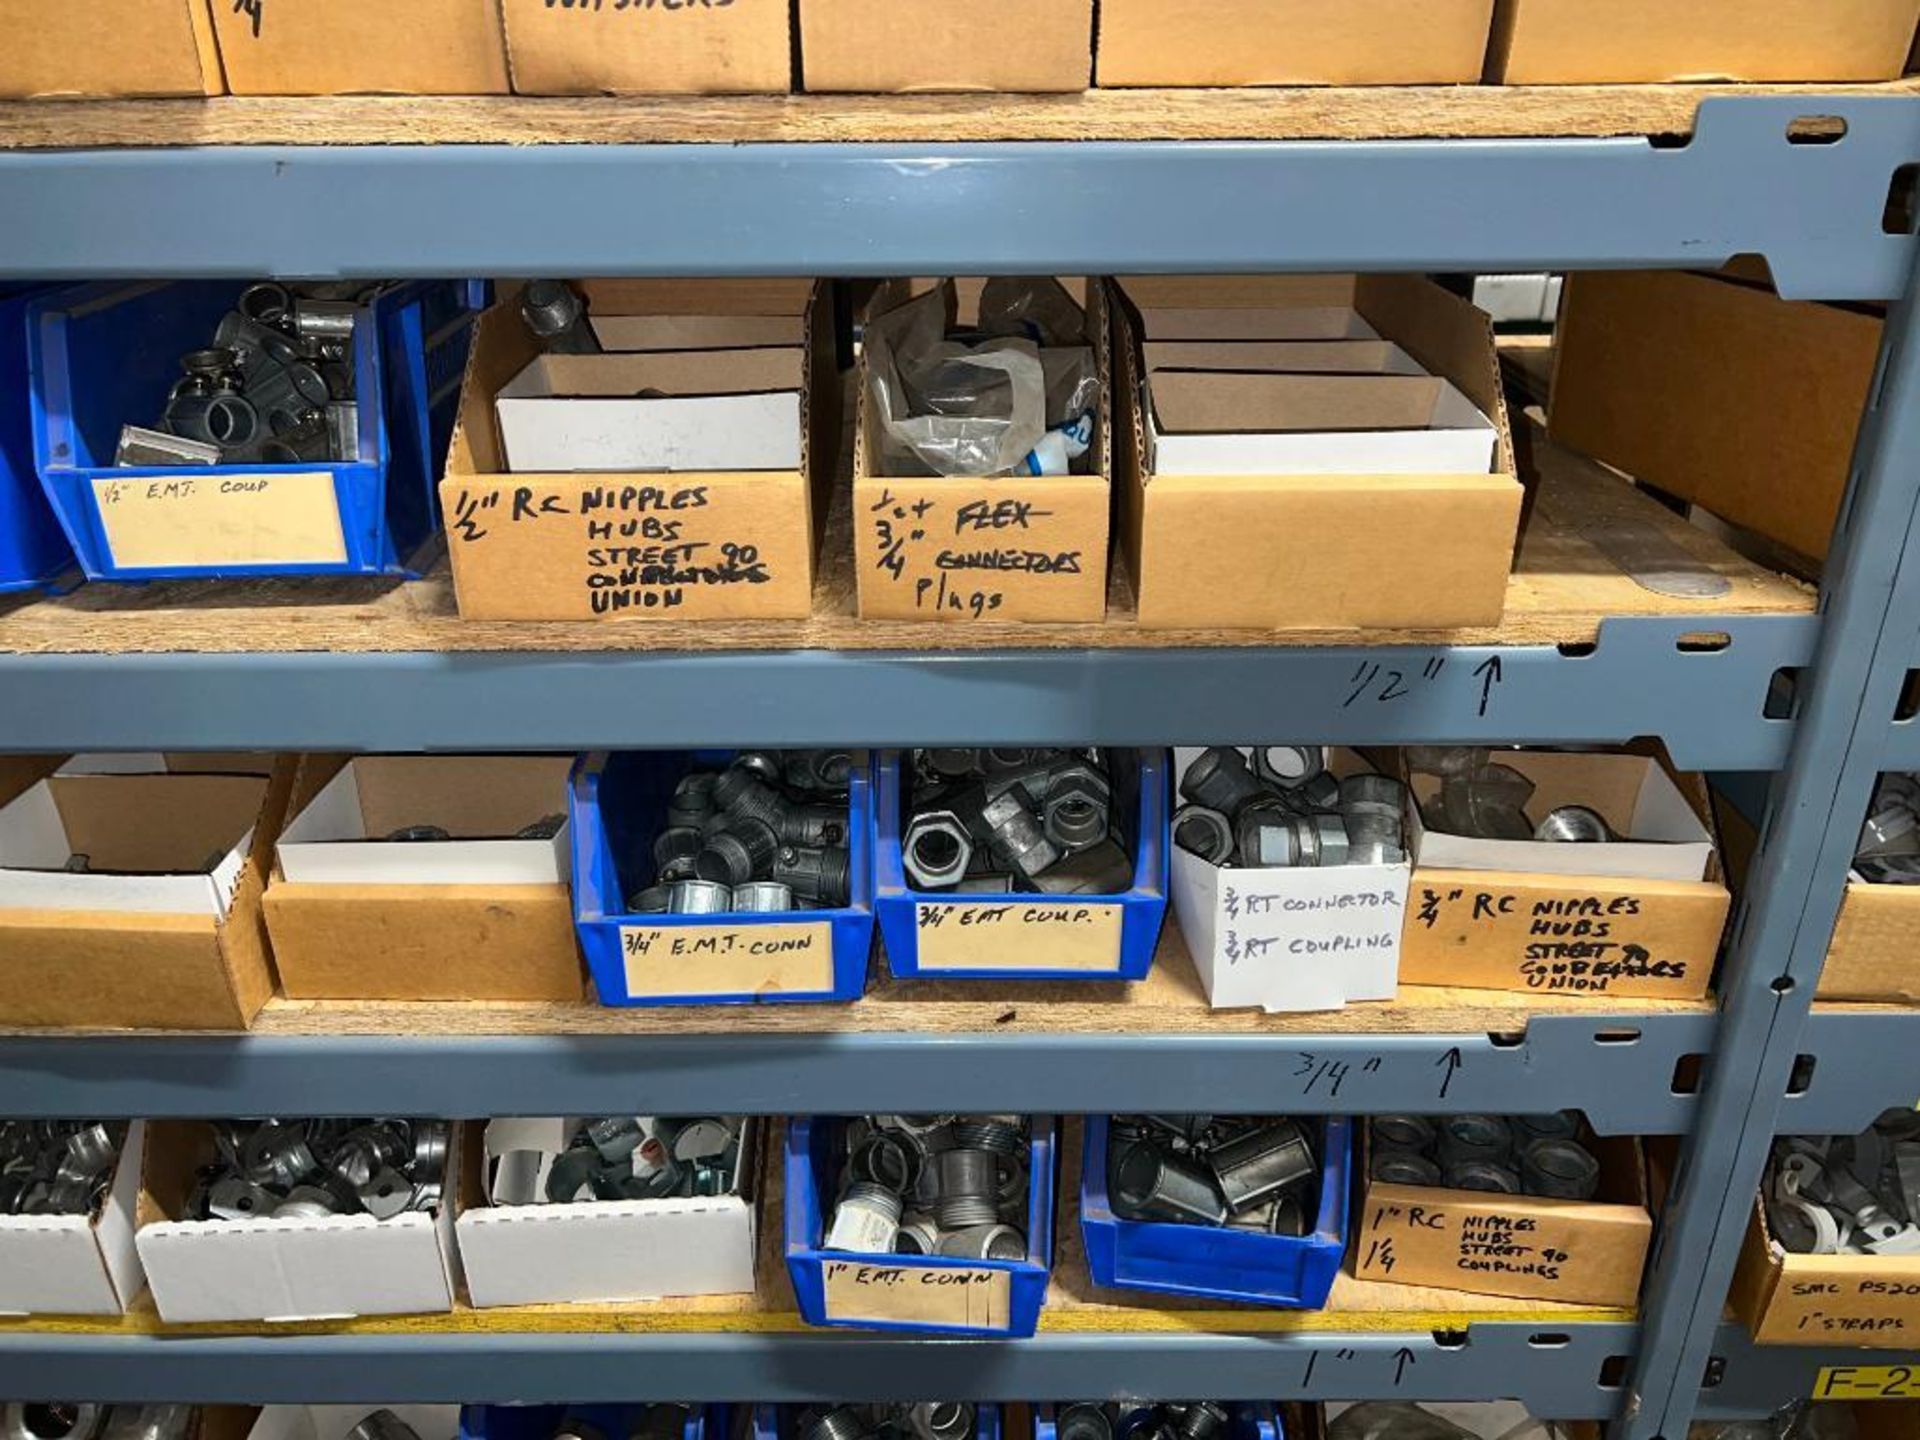 Assorted Electrical Equipment, Including: Circuit Breakers, Conduit, Conduit Adapters and Enclosures - Image 14 of 46